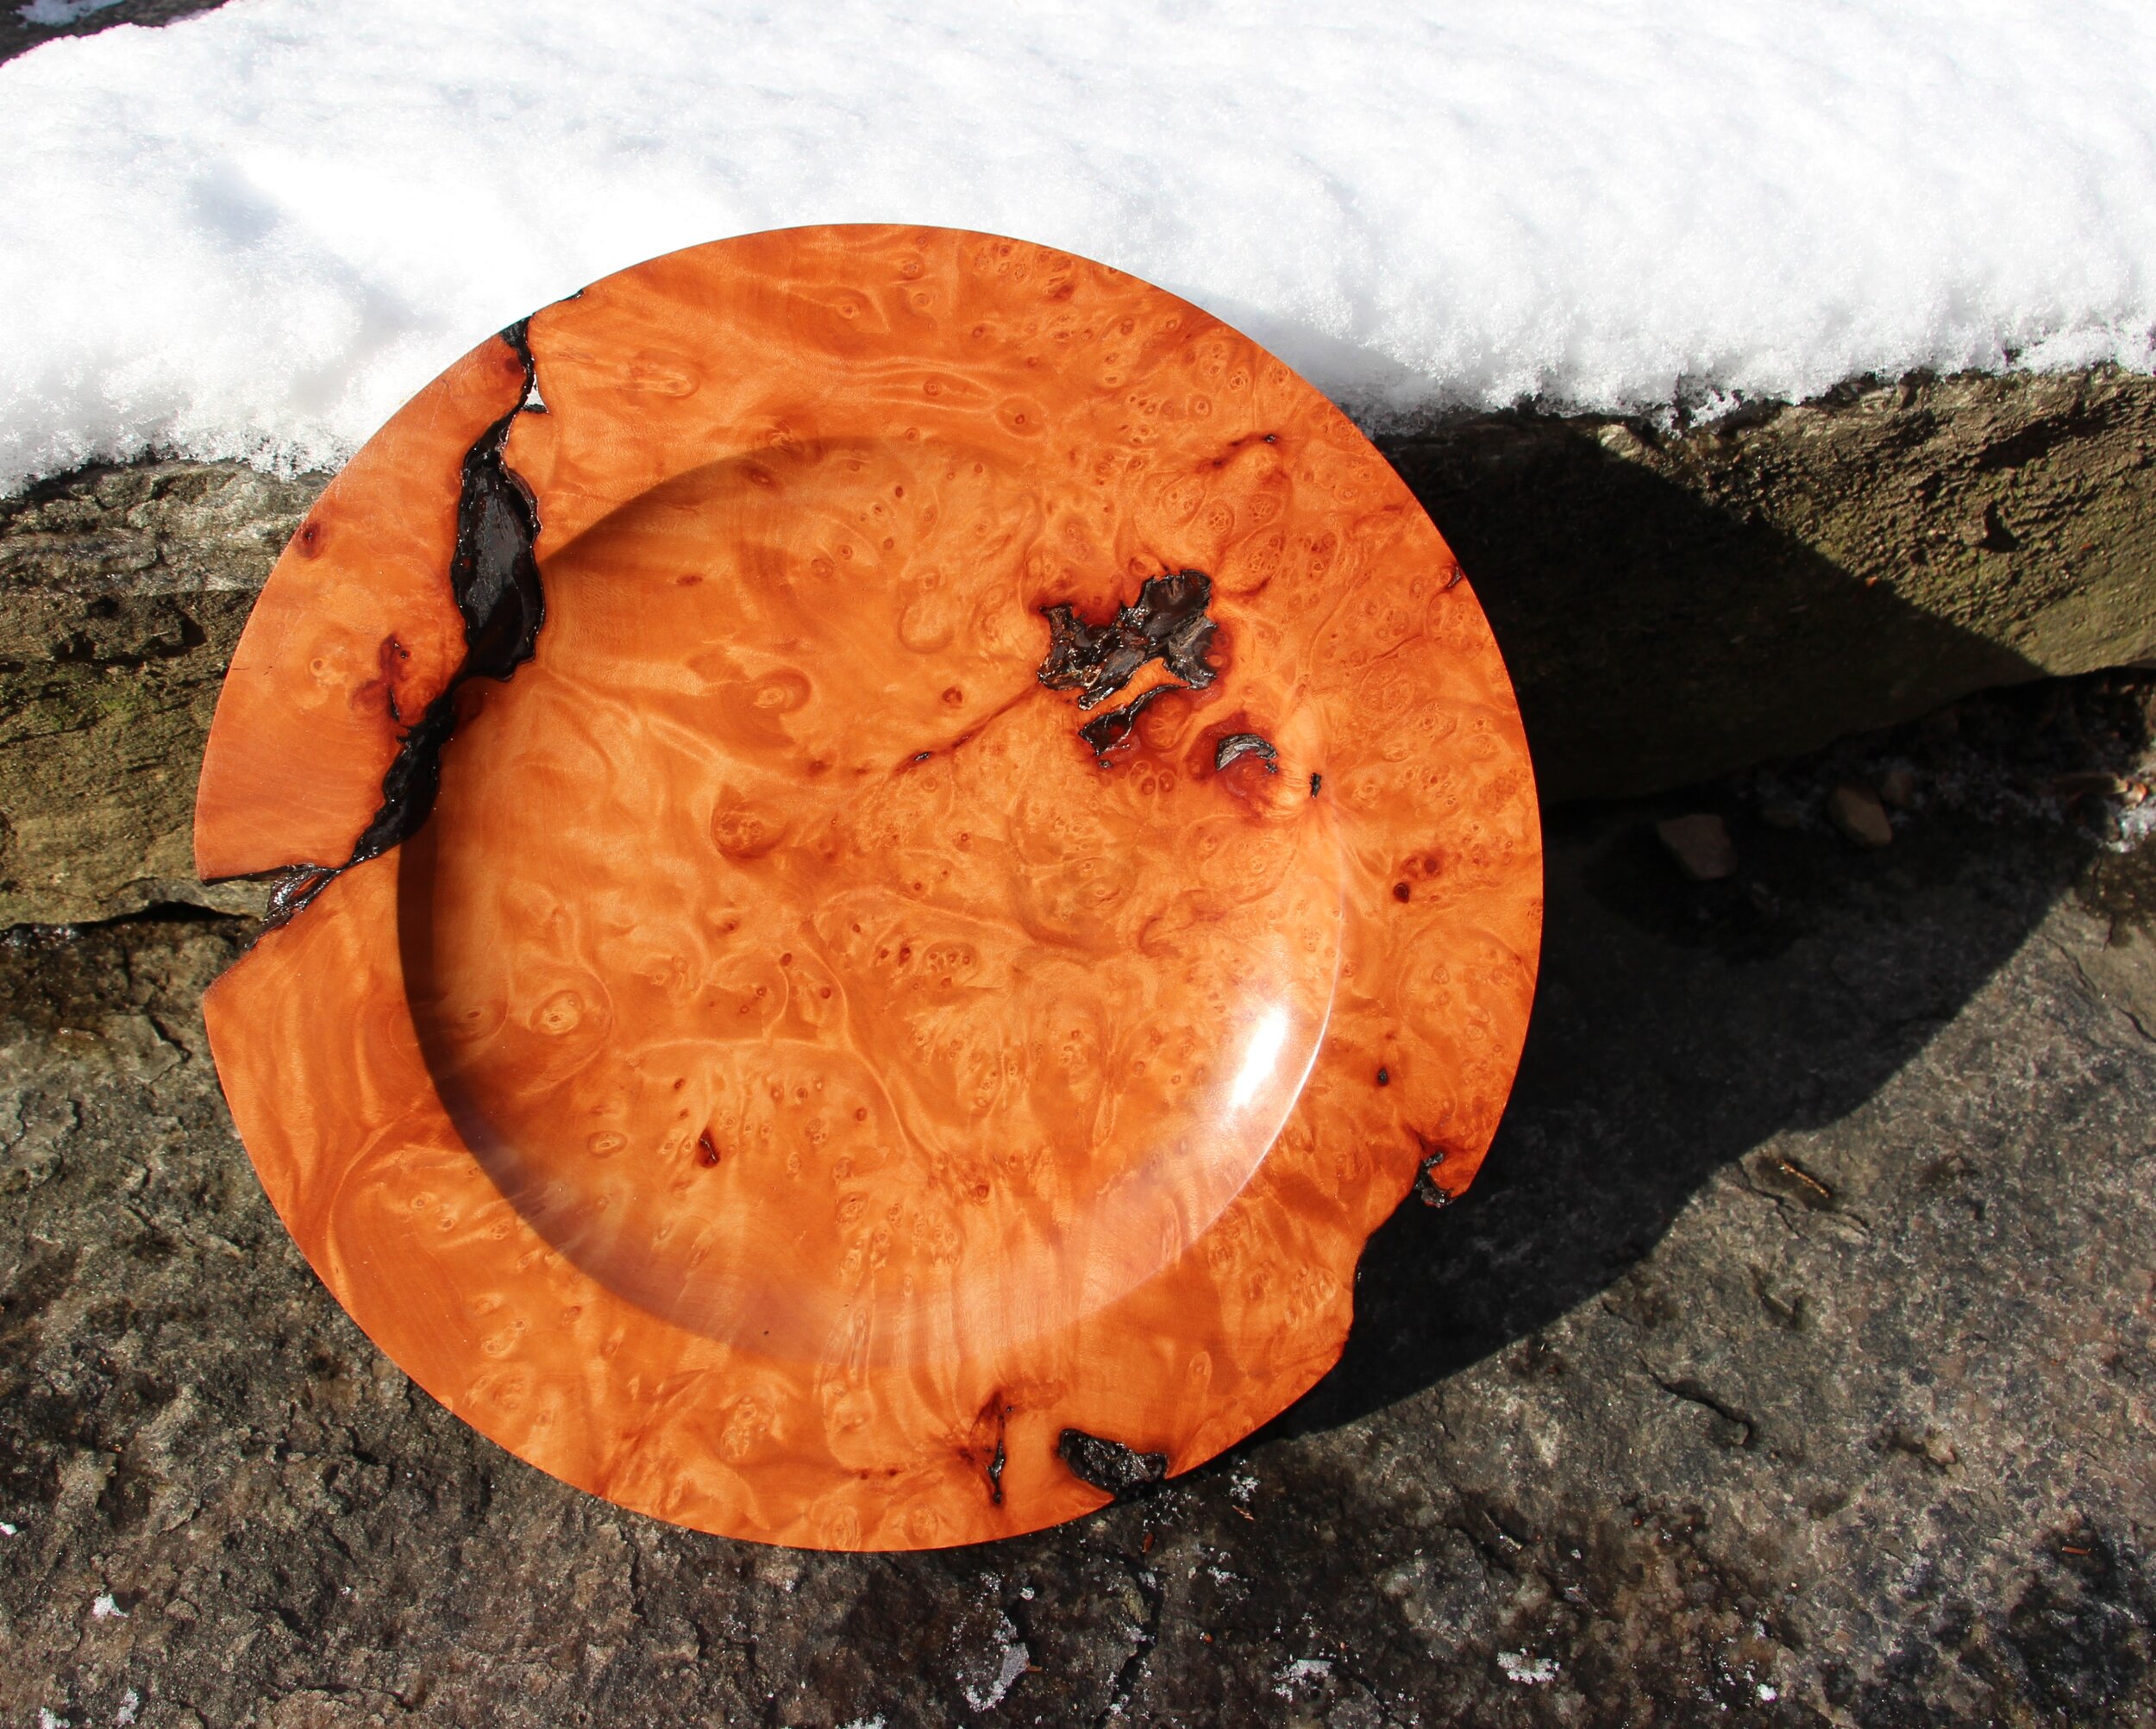  I don’t get a lot of Madrone Burl as it is found on the west coast of Canada, but I love the rich tones of red and yellow in this wood.  Madrone Burl Platter 12” x 1.5” high $300 